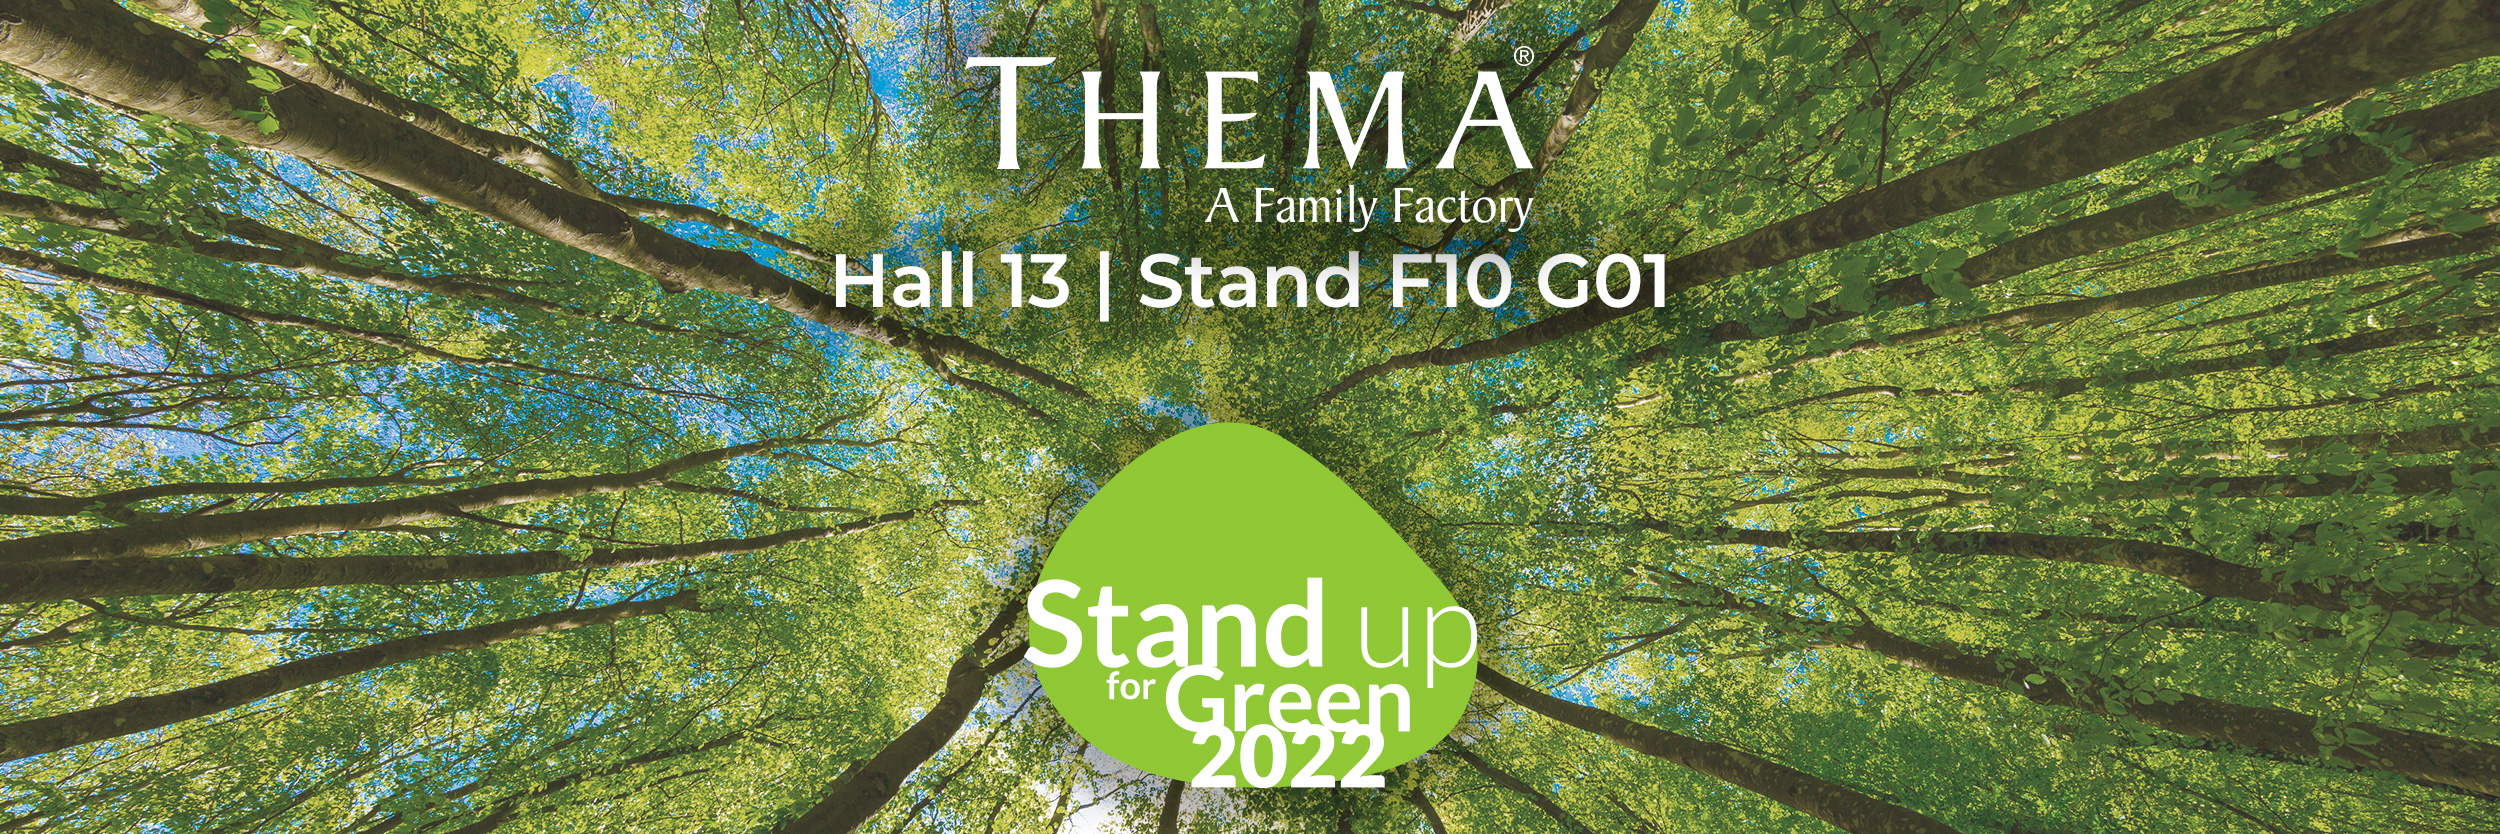 We will participate in the Stand up for green competition